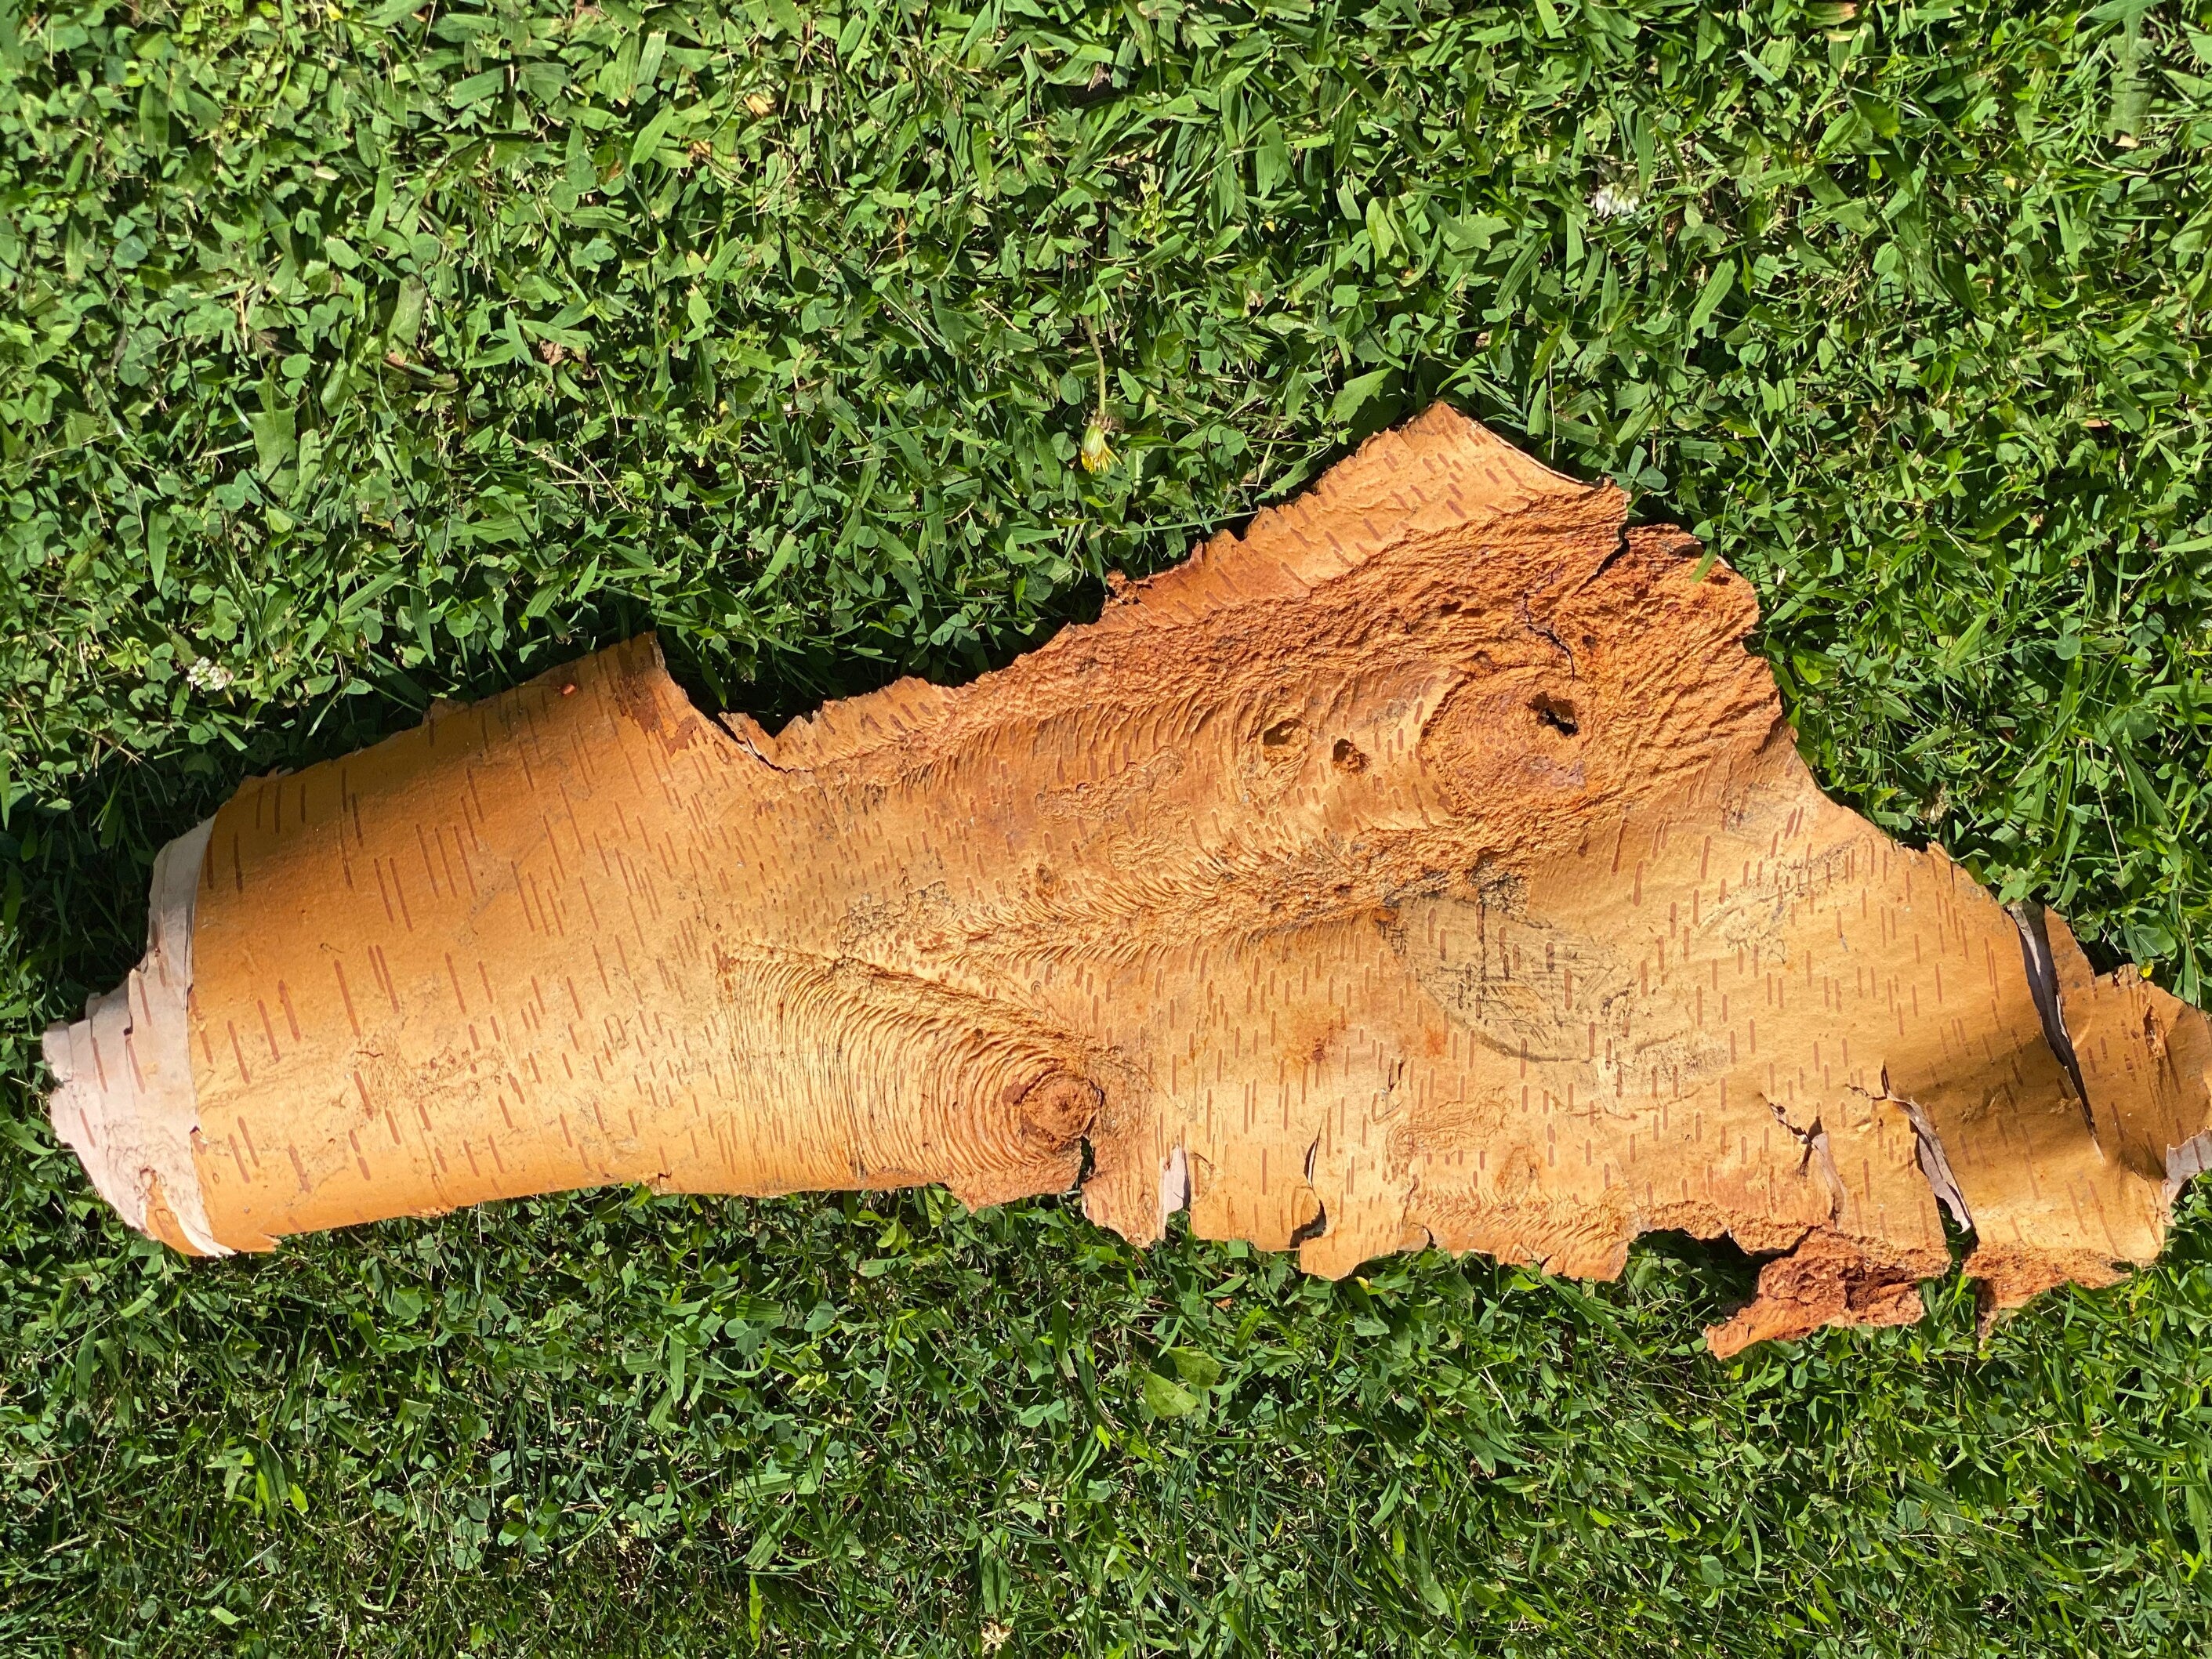 White Birch Bark with Live Natural Moss, Approximately 26 Inches Long by 11 Inches Wide